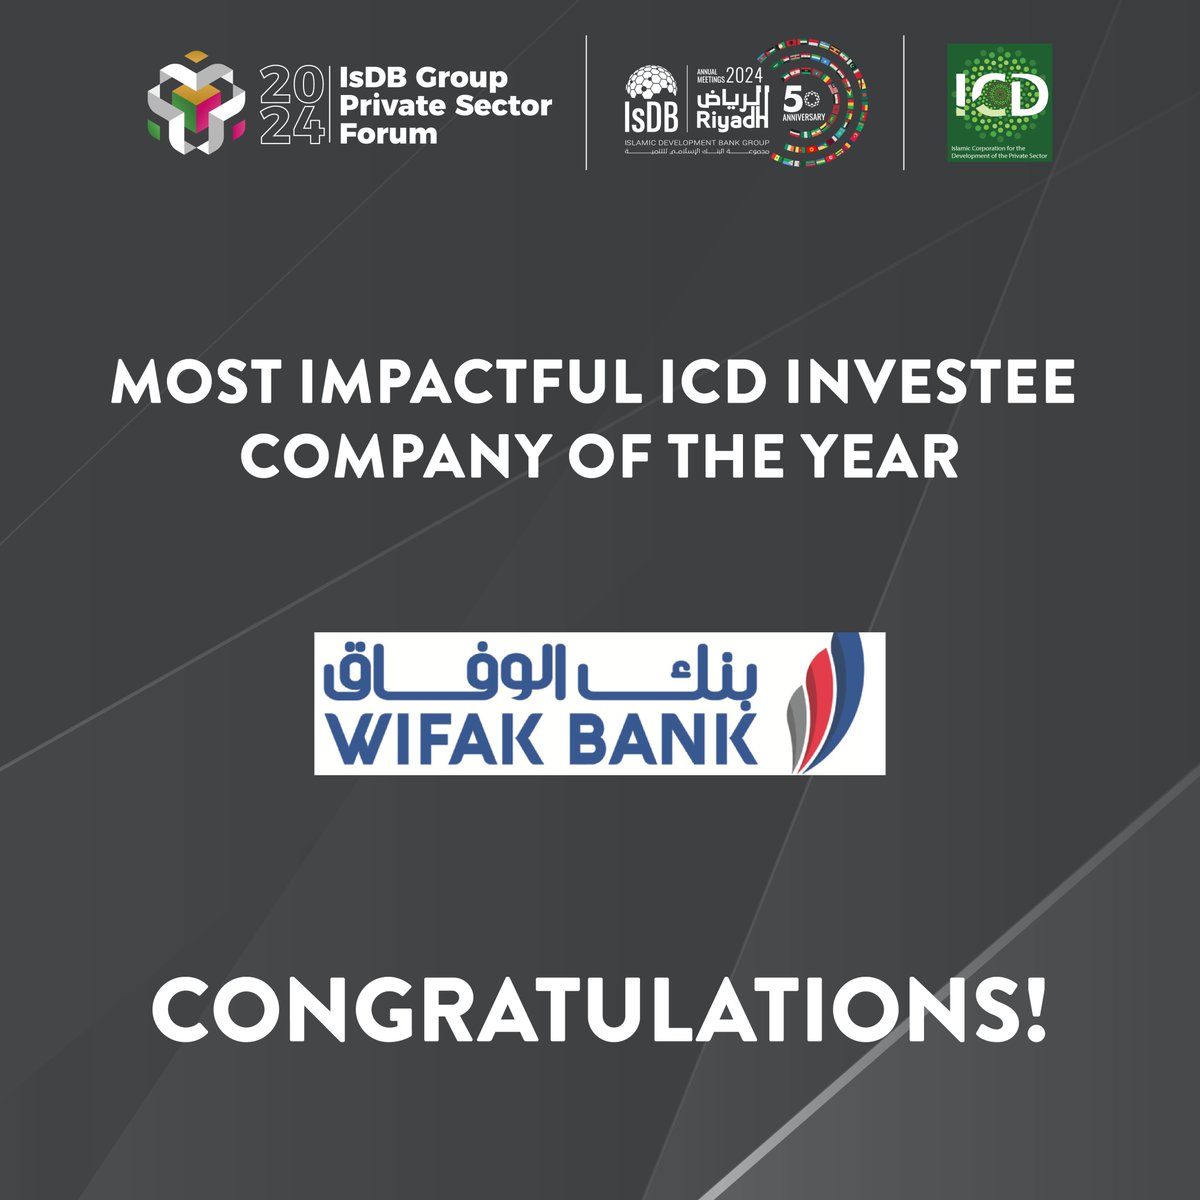 IsDB announces the winner of the Most Impactful ICD Investee Company of the Year: Tunisia’s Wifak Bank islamicfinancenews.com/daily-cover-st… #PSFAwards #PrivateSectorForumAwards #IsDBGroup #ICIEC #ICD #ITFC #ShariahCompliant #TradeFinance #PrivateSectorDevelopment #FinancialInnovation